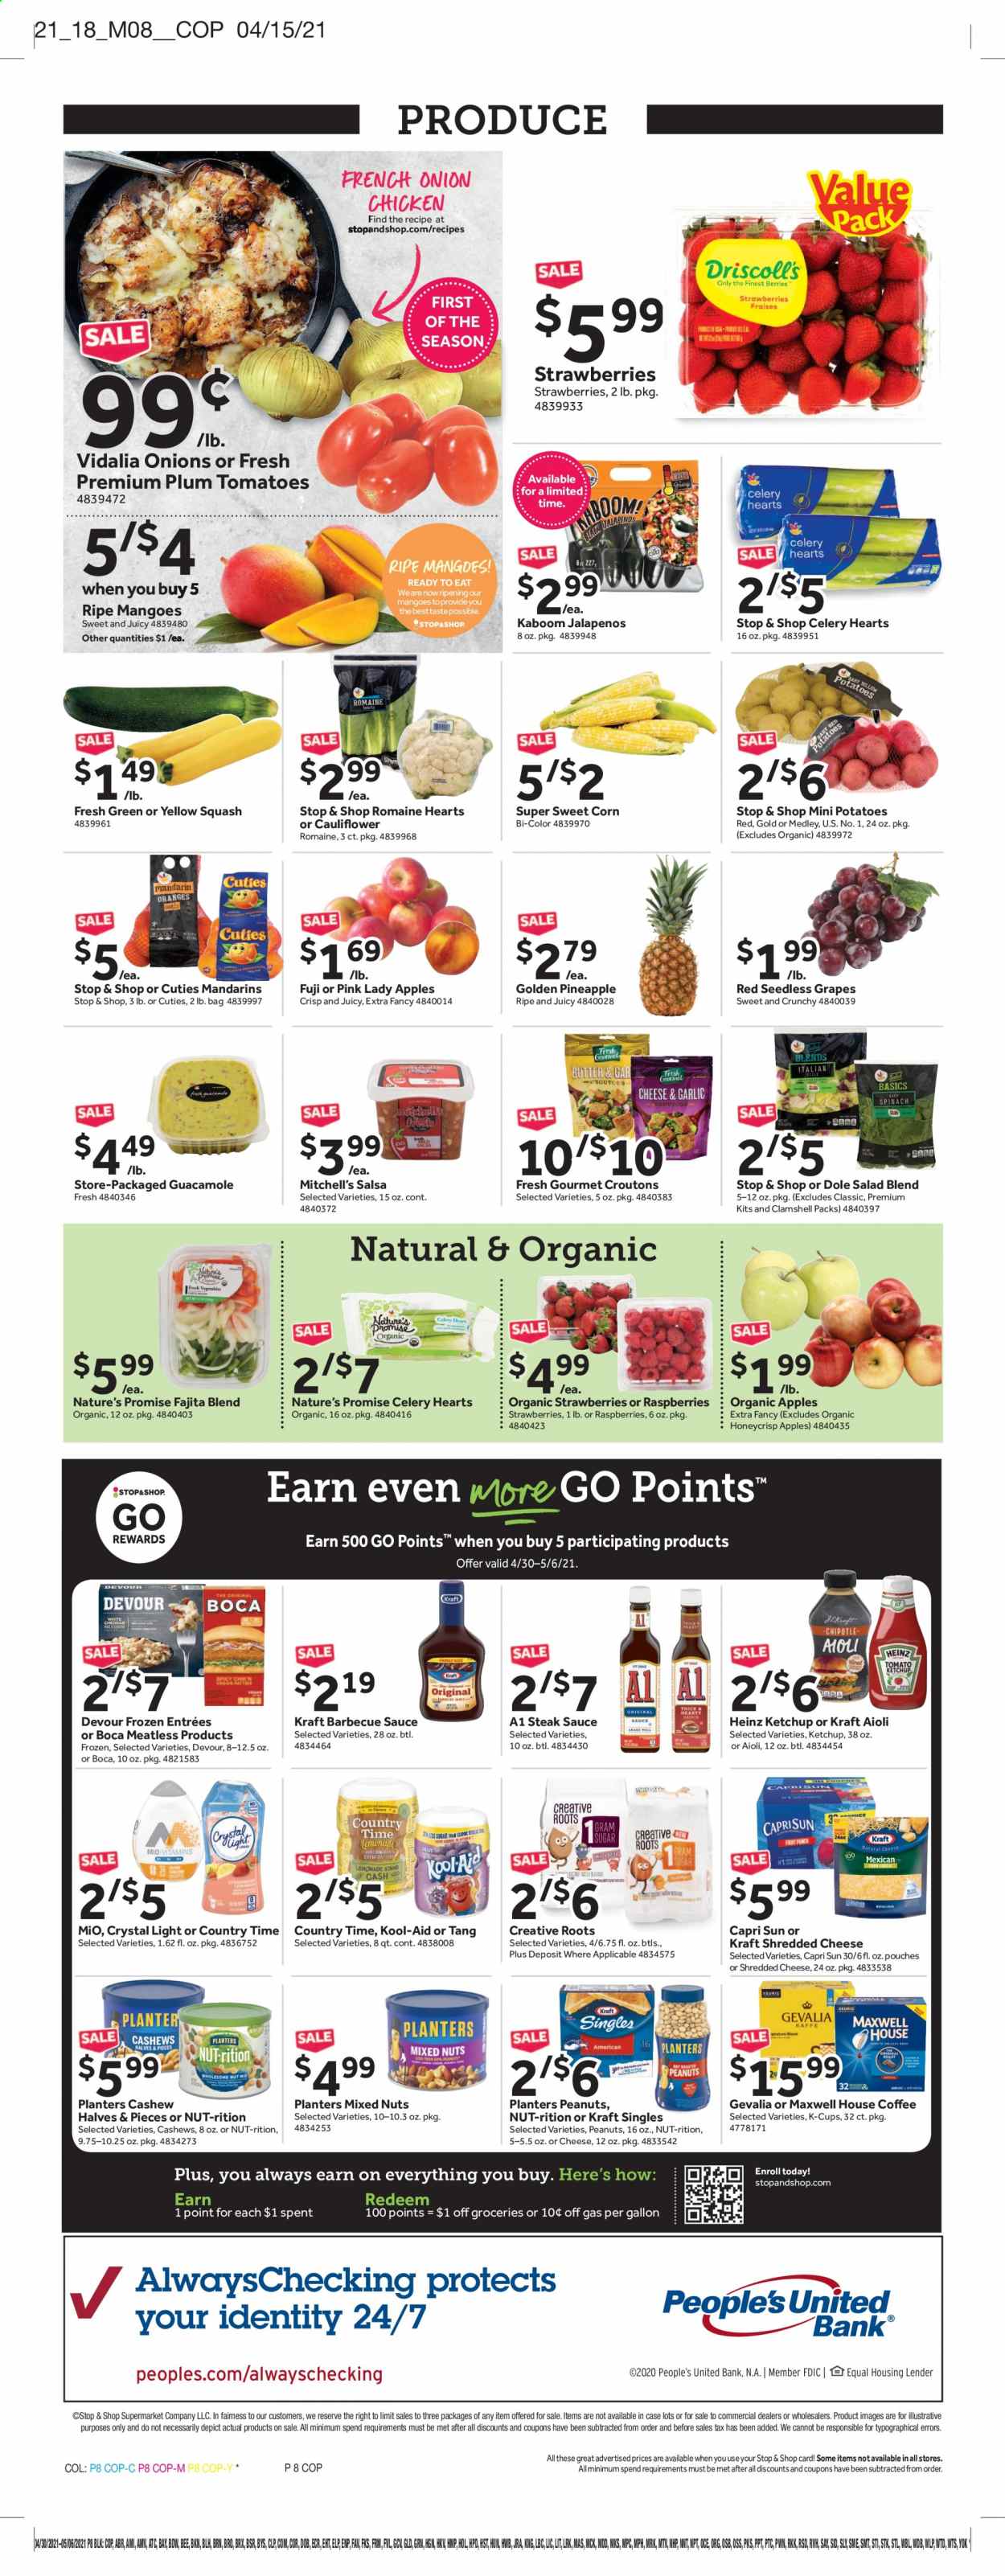 thumbnail - Stop & Shop Flyer - 04/30/2021 - 05/06/2021 - Sales products - seedless grapes, Nature’s Promise, corn, tomatoes, potatoes, onion, Dole, sleeved celery, yellow squash, apples, grapes, mandarines, mango, raspberries, strawberries, Pink Lady, steak, sauce, Kraft®, fajita mix, guacamole, sandwich slices, shredded cheese, Kraft Singles, Devour, croutons, Heinz, BBQ sauce, steak sauce, ketchup, salsa, cashews, peanuts, mixed nuts, Planters, Capri Sun, Country Time, Maxwell House, coffee capsules, K-Cups, Gevalia, pineapple. Page 10.